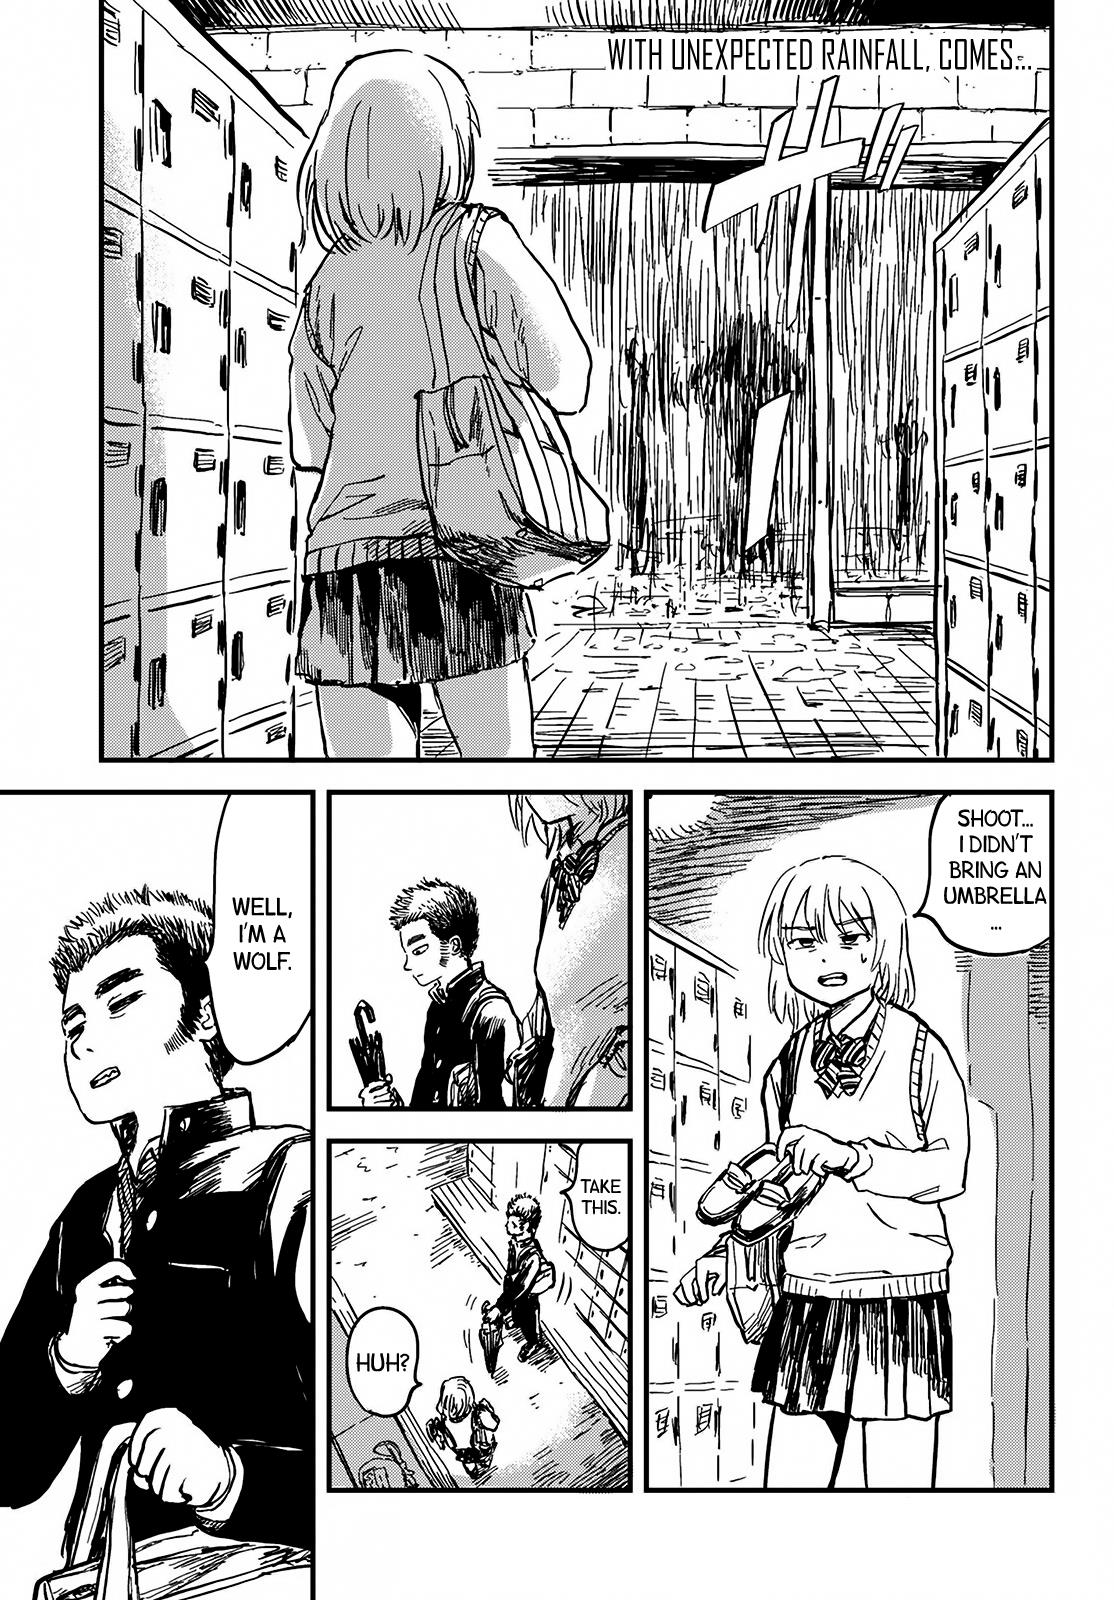 The People Of The Rising Moon City Vol.1 Chapter 2: The Invisible Girl And The Werewolf Boy - Picture 1